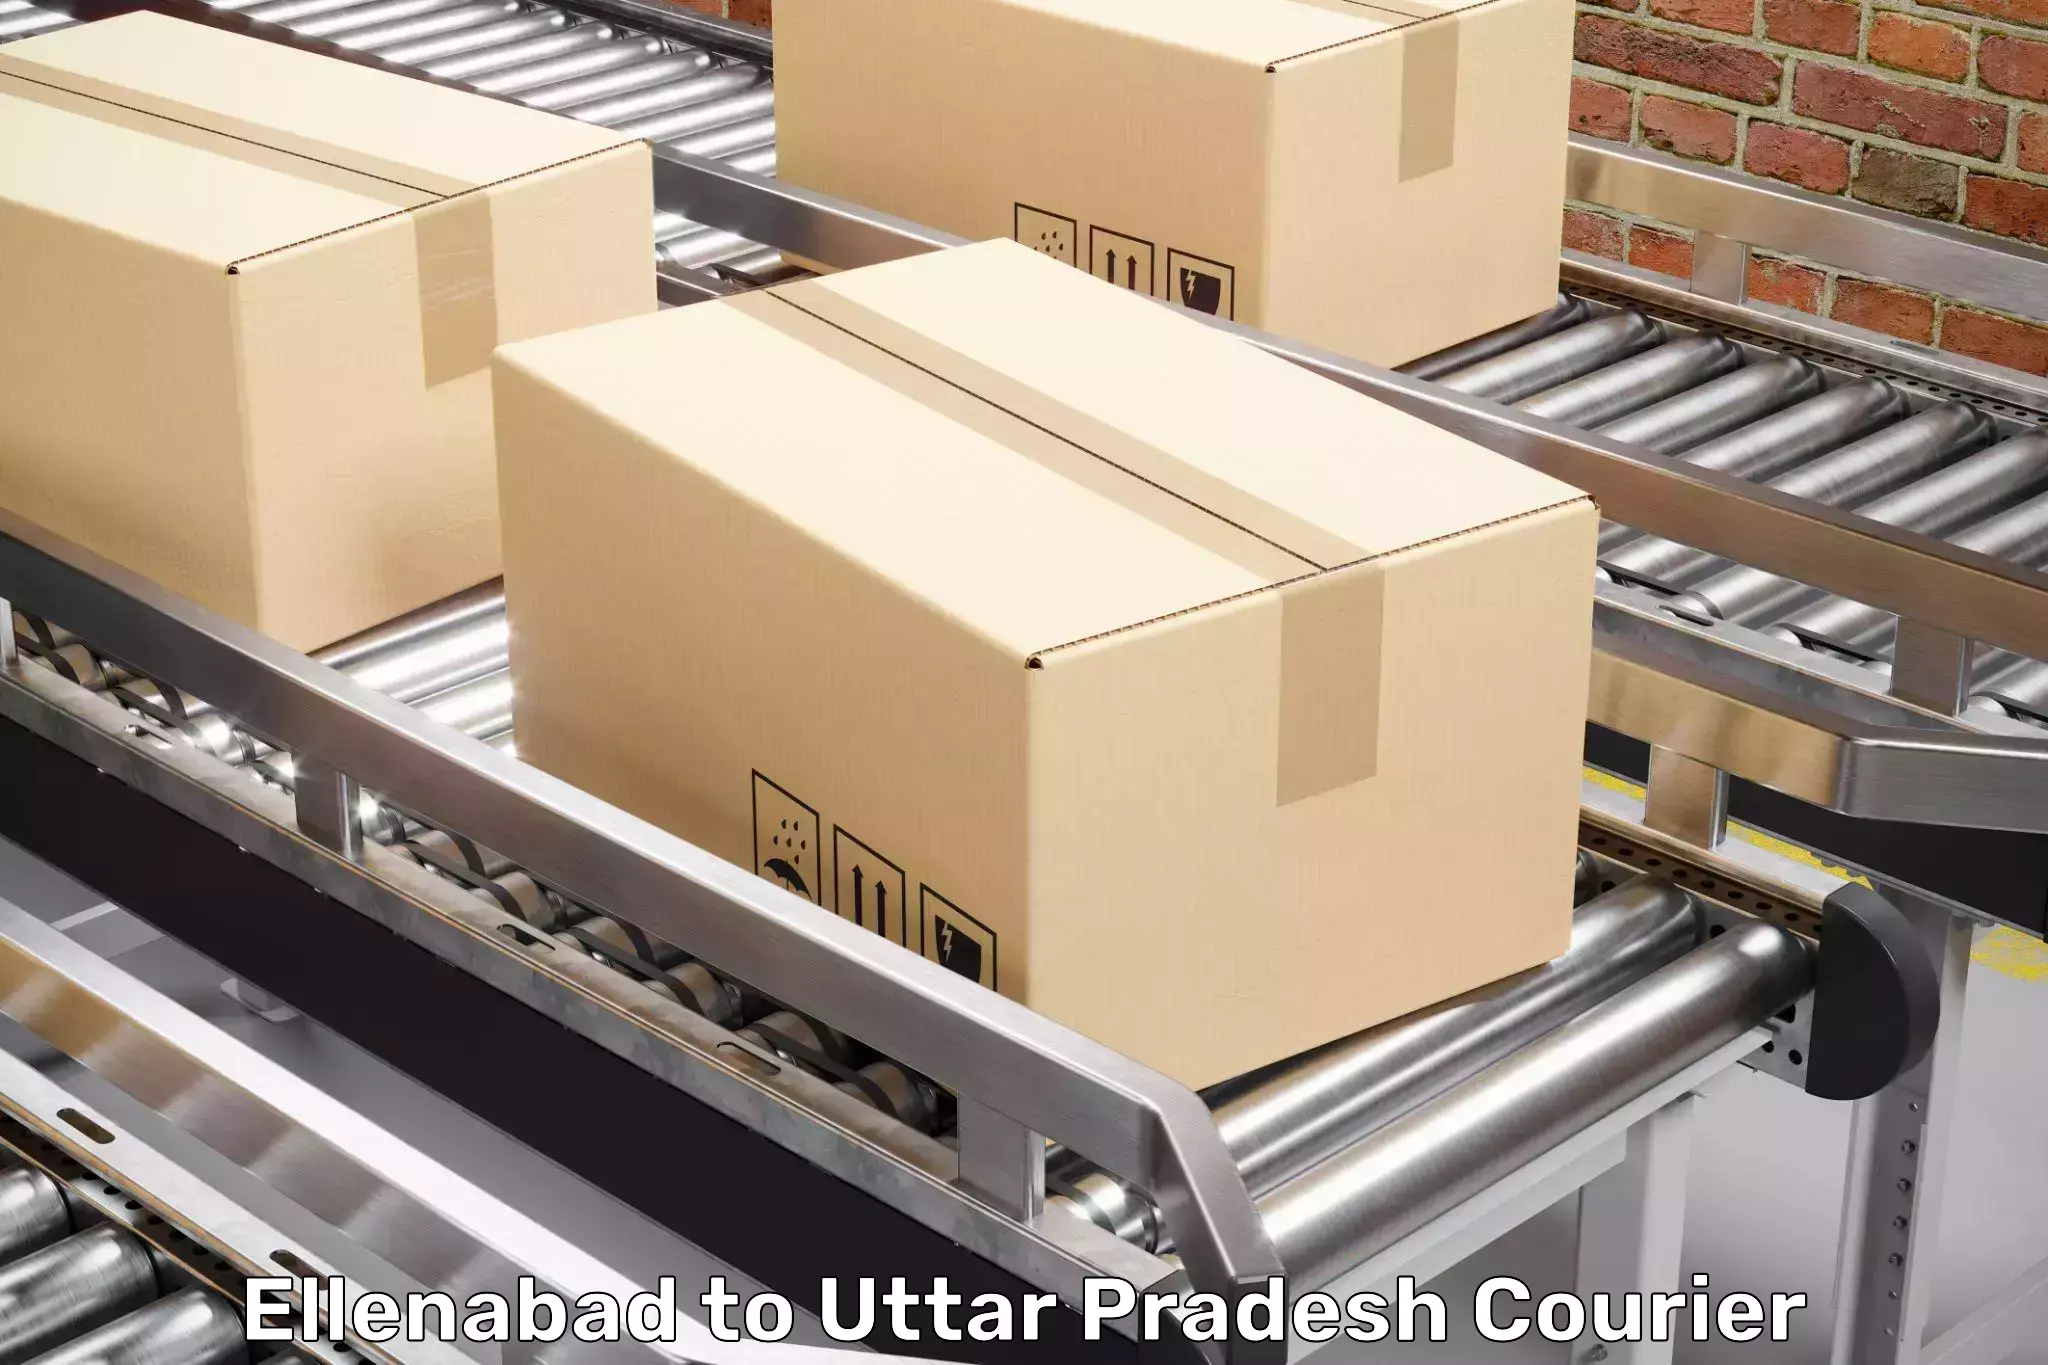 Comprehensive household relocation in Ellenabad to Agra